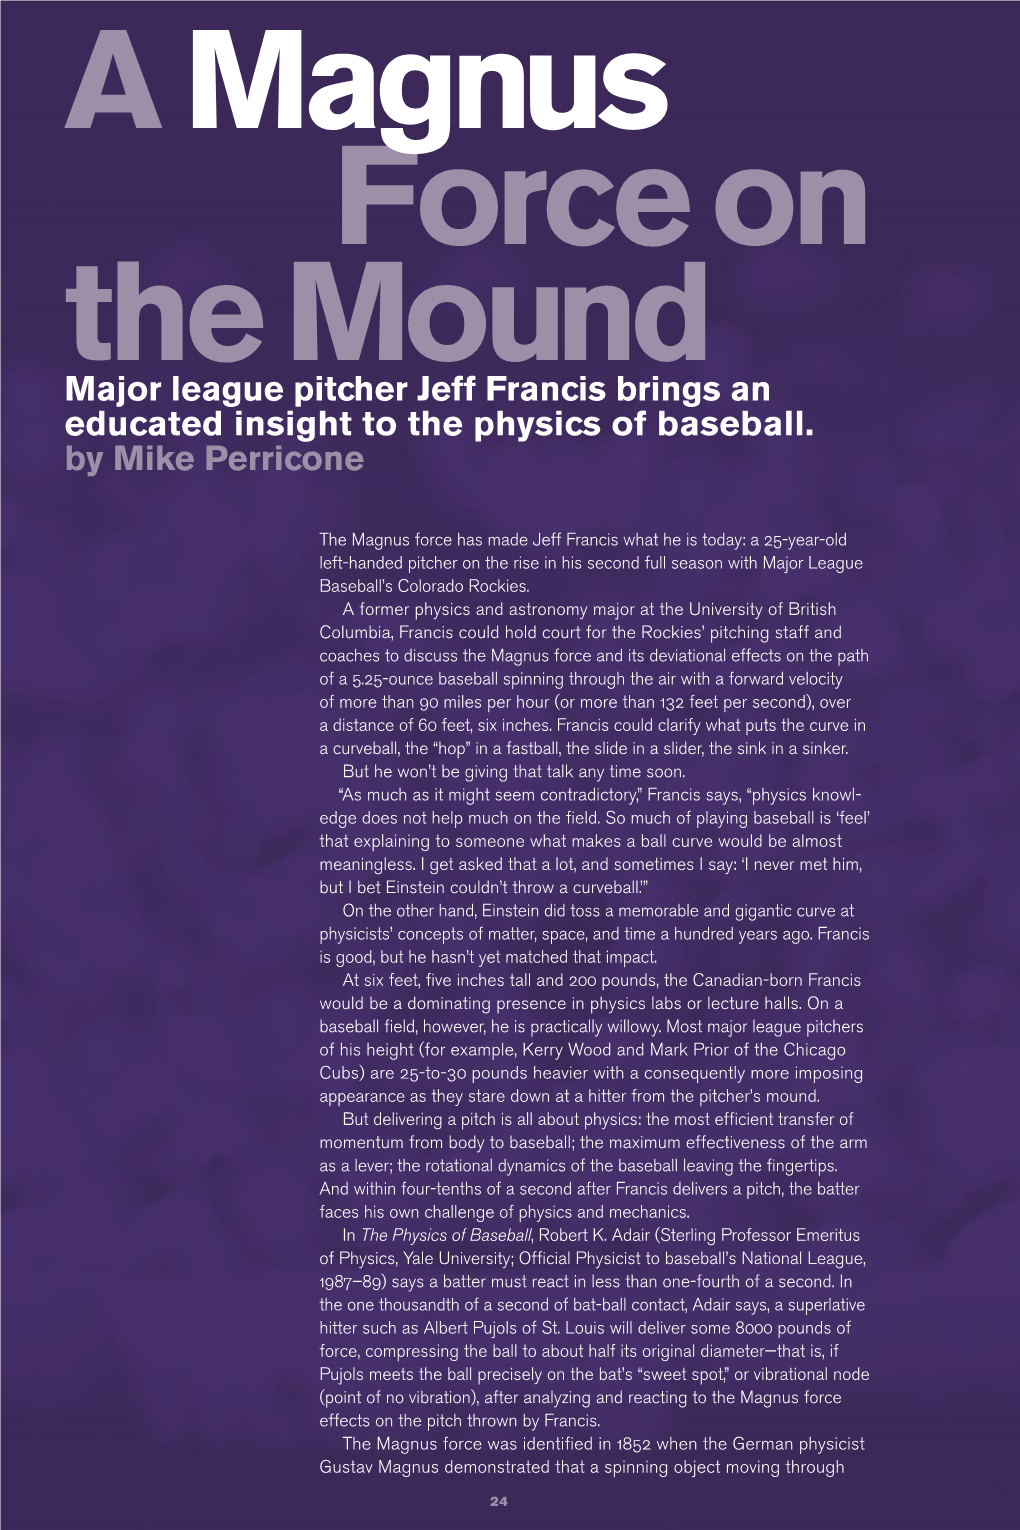 Major League Pitcher Jeff Francis Brings an Educated Insight to the Physics of Baseball